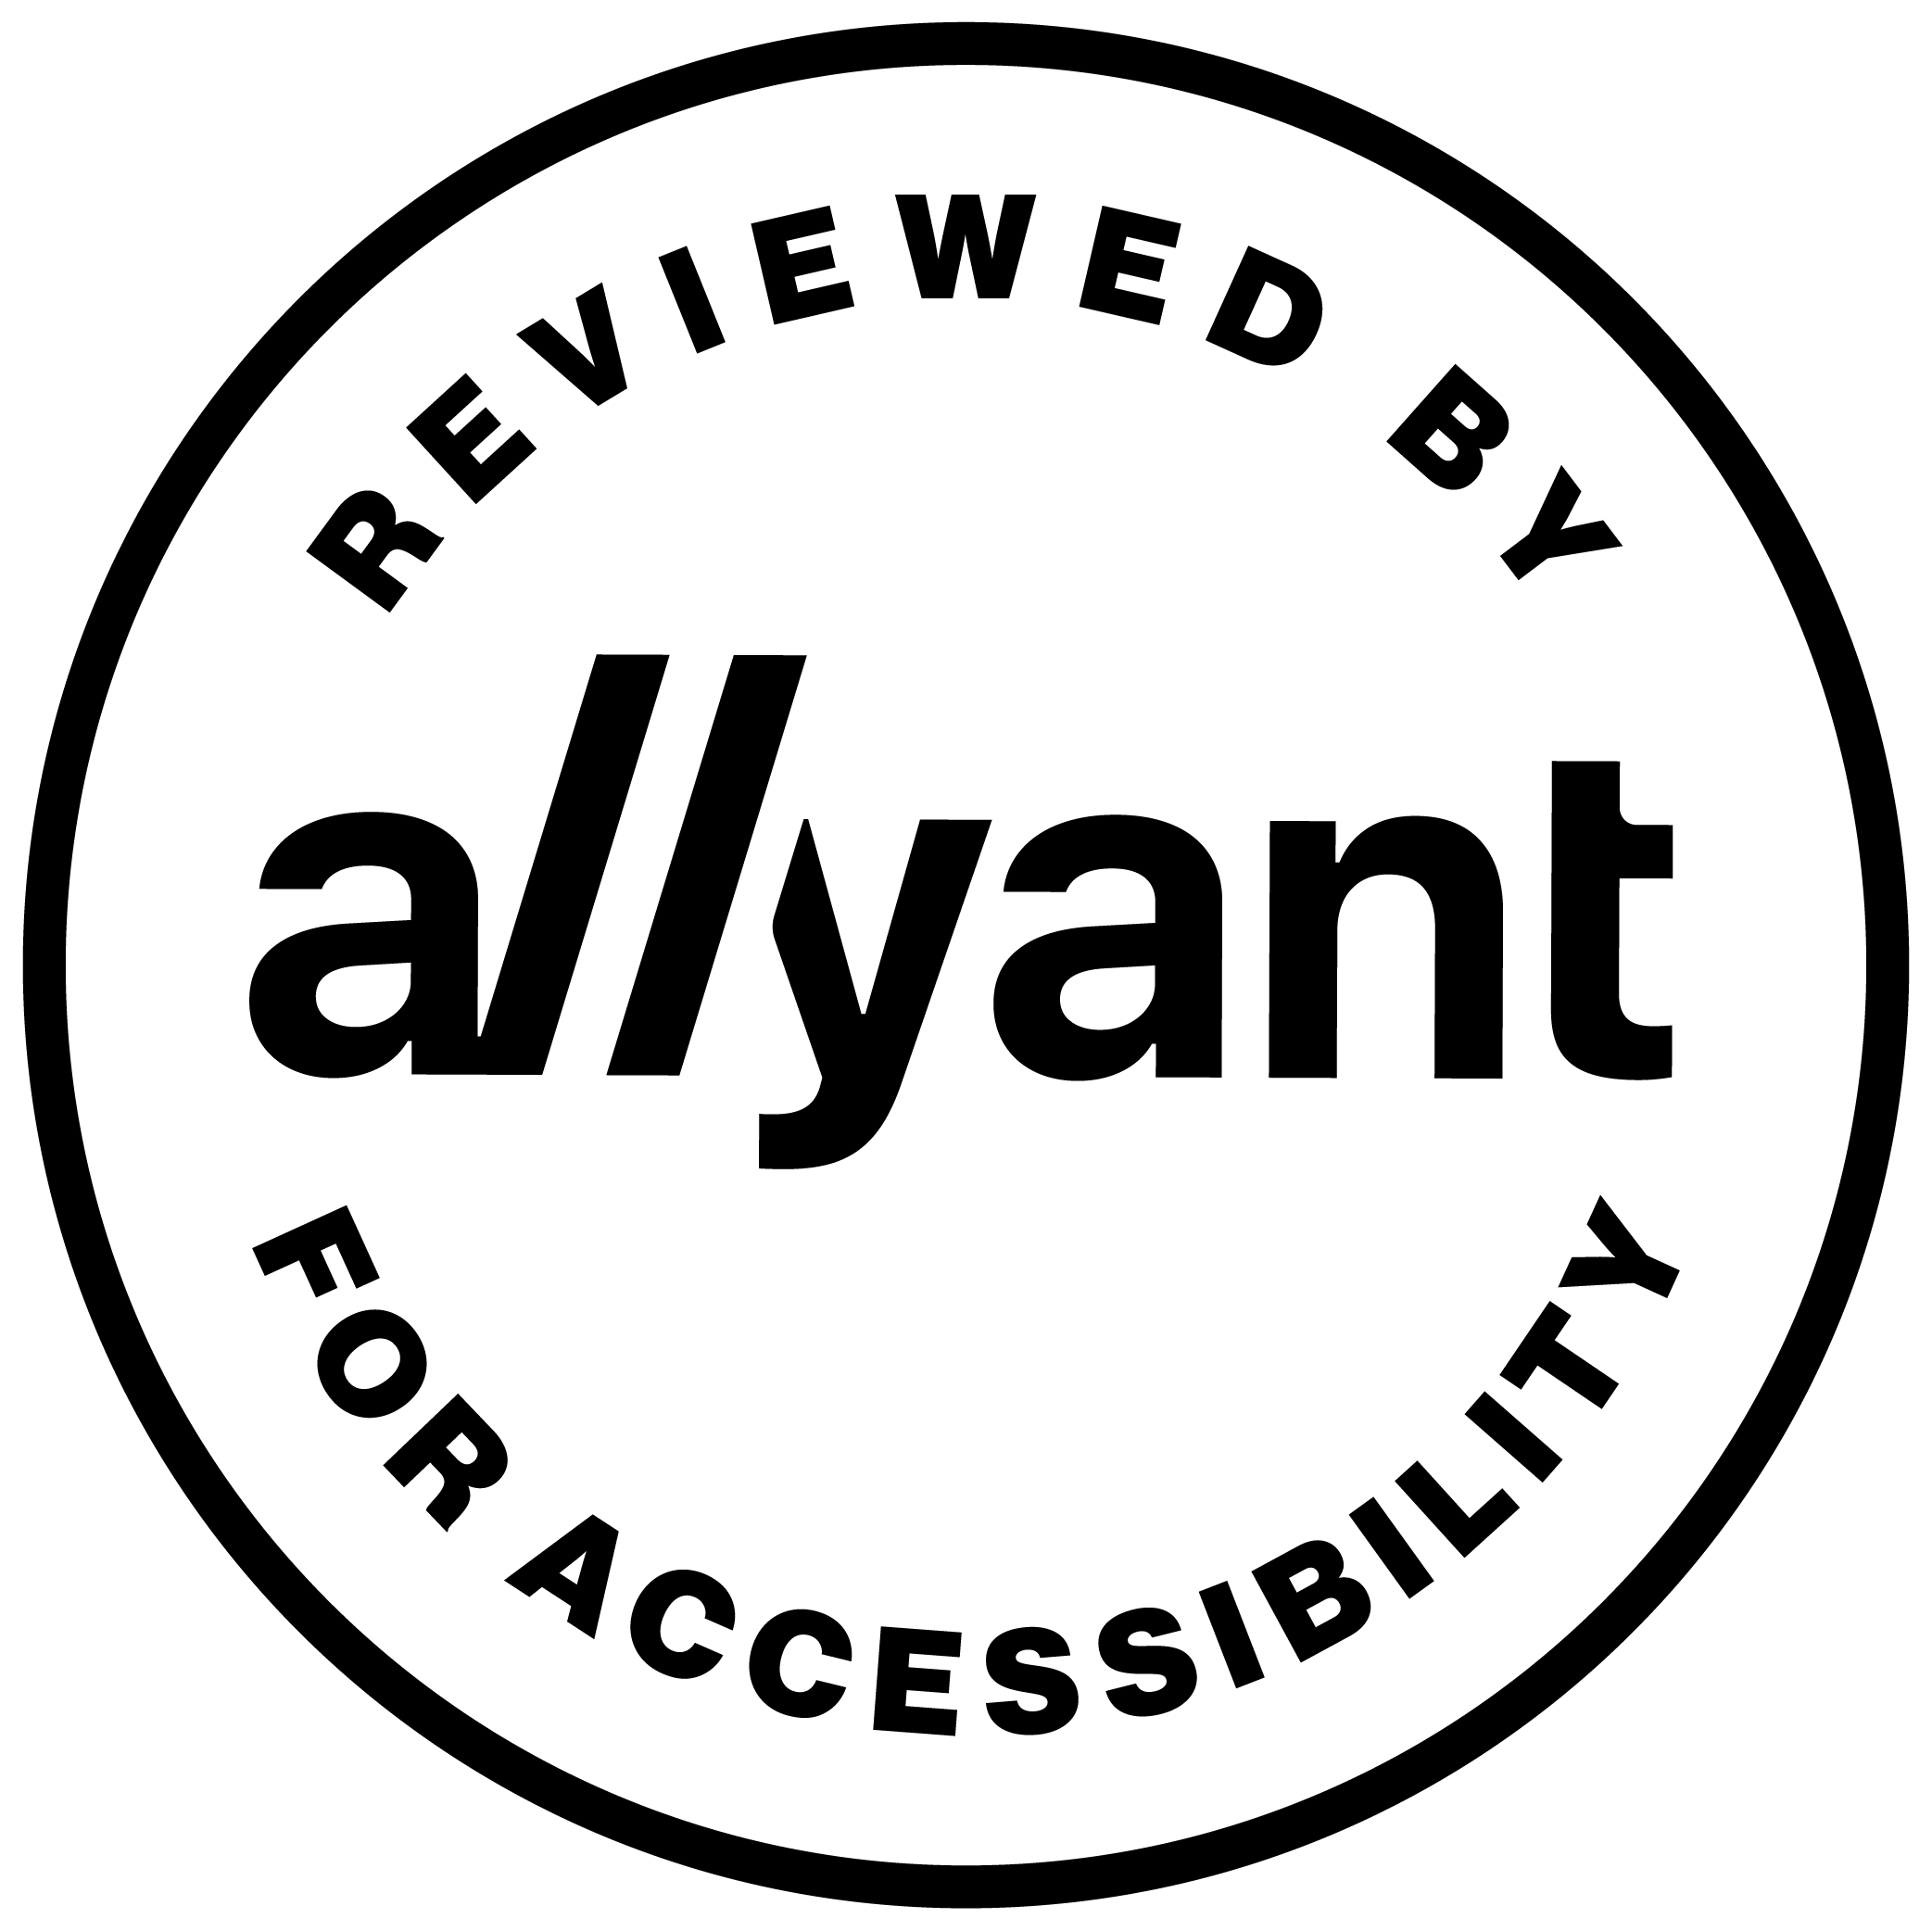 Reviewed by accessible 360